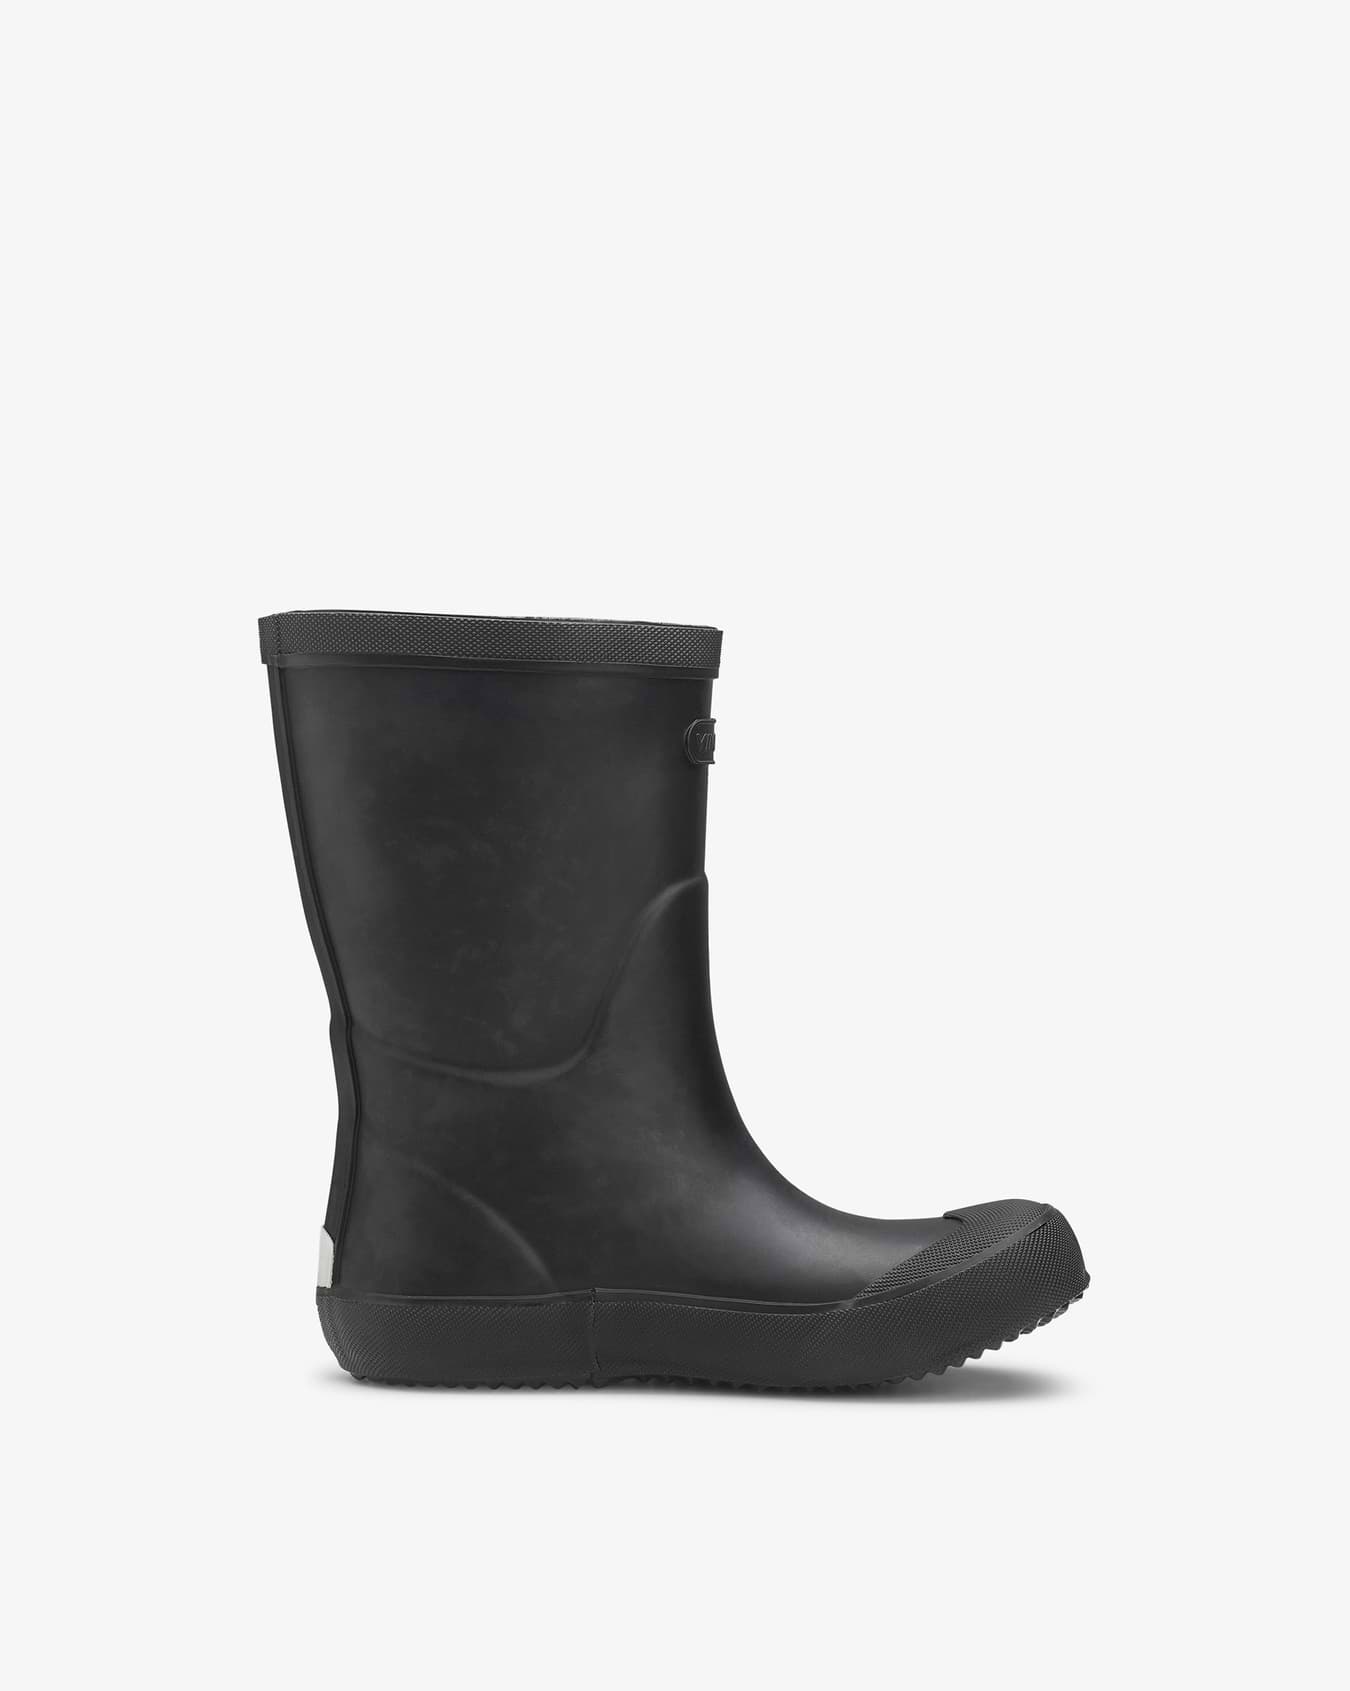 Indie Active Black Rubber Boot